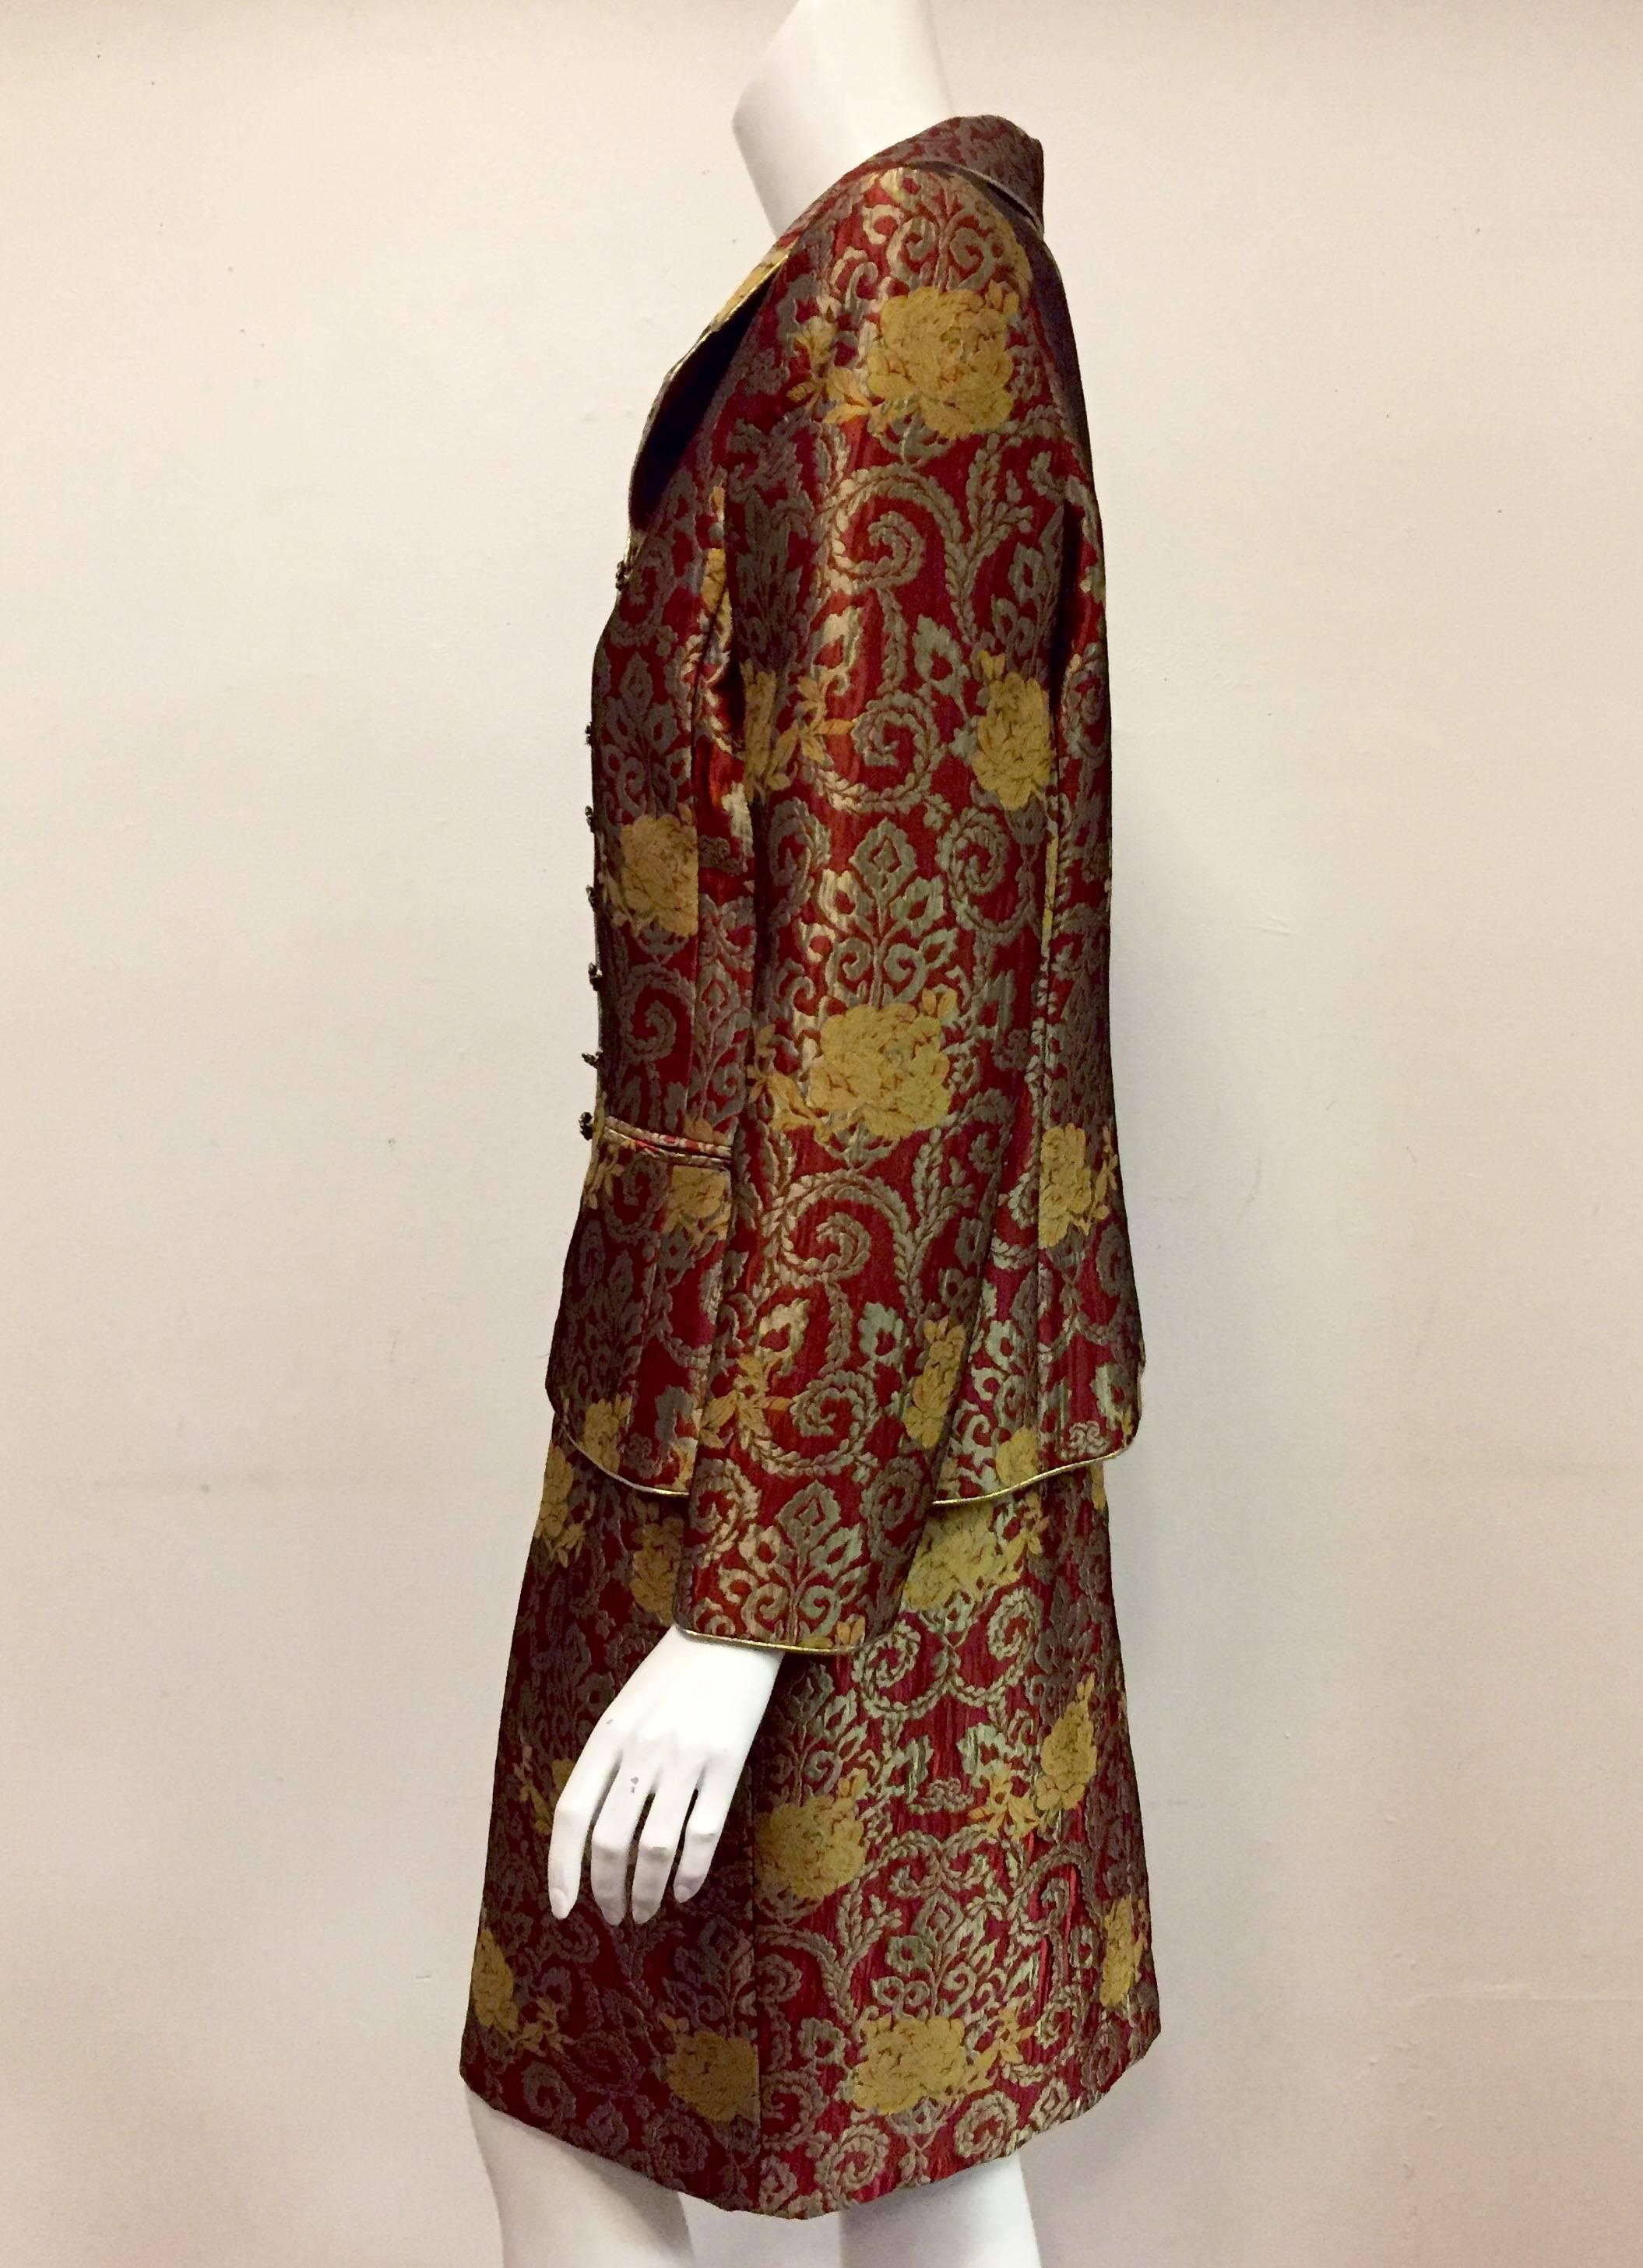 Mary McFadden's magnificent rust, bronze and gold brocade suit features 8 rust color rhinestone buttons on jacket front.  Jacket features notched collar with gold cord trim on collar, front closure, cuffs and hem.  `Two faux pockets at front finish